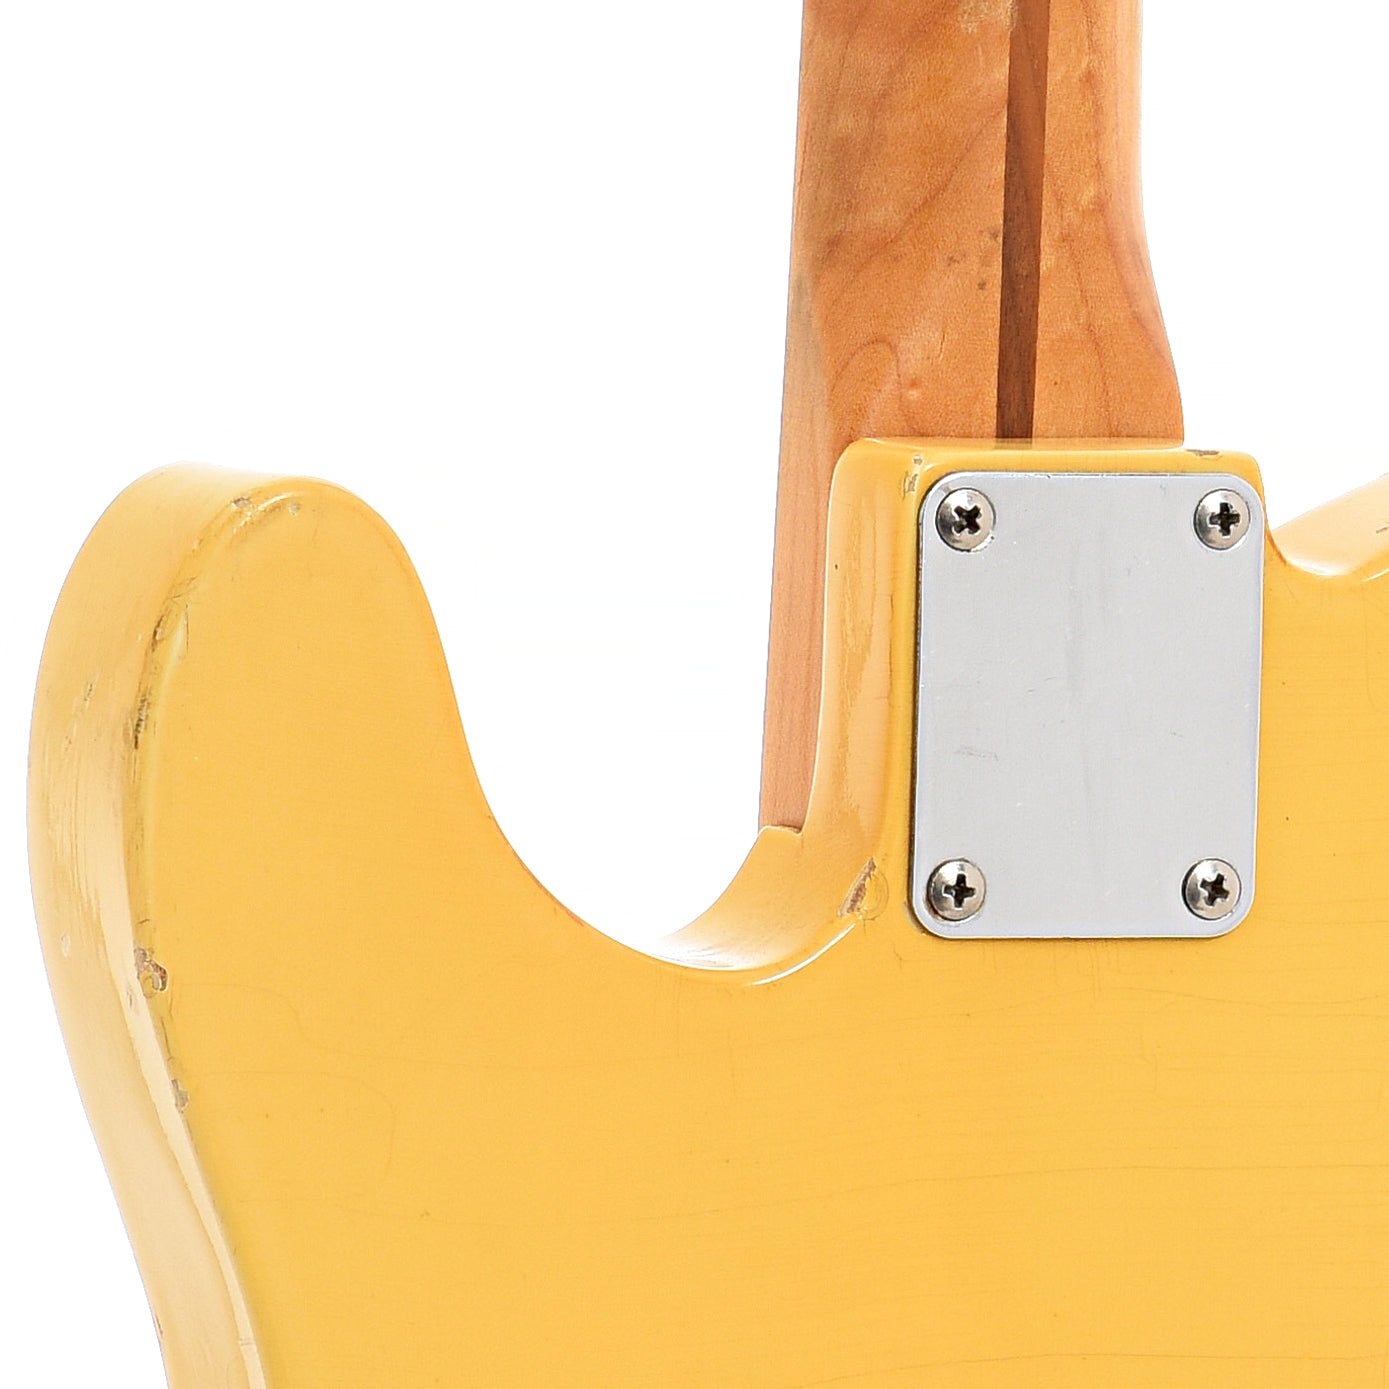 Neck joint of Fender Esquire Electric Guitar (1954)